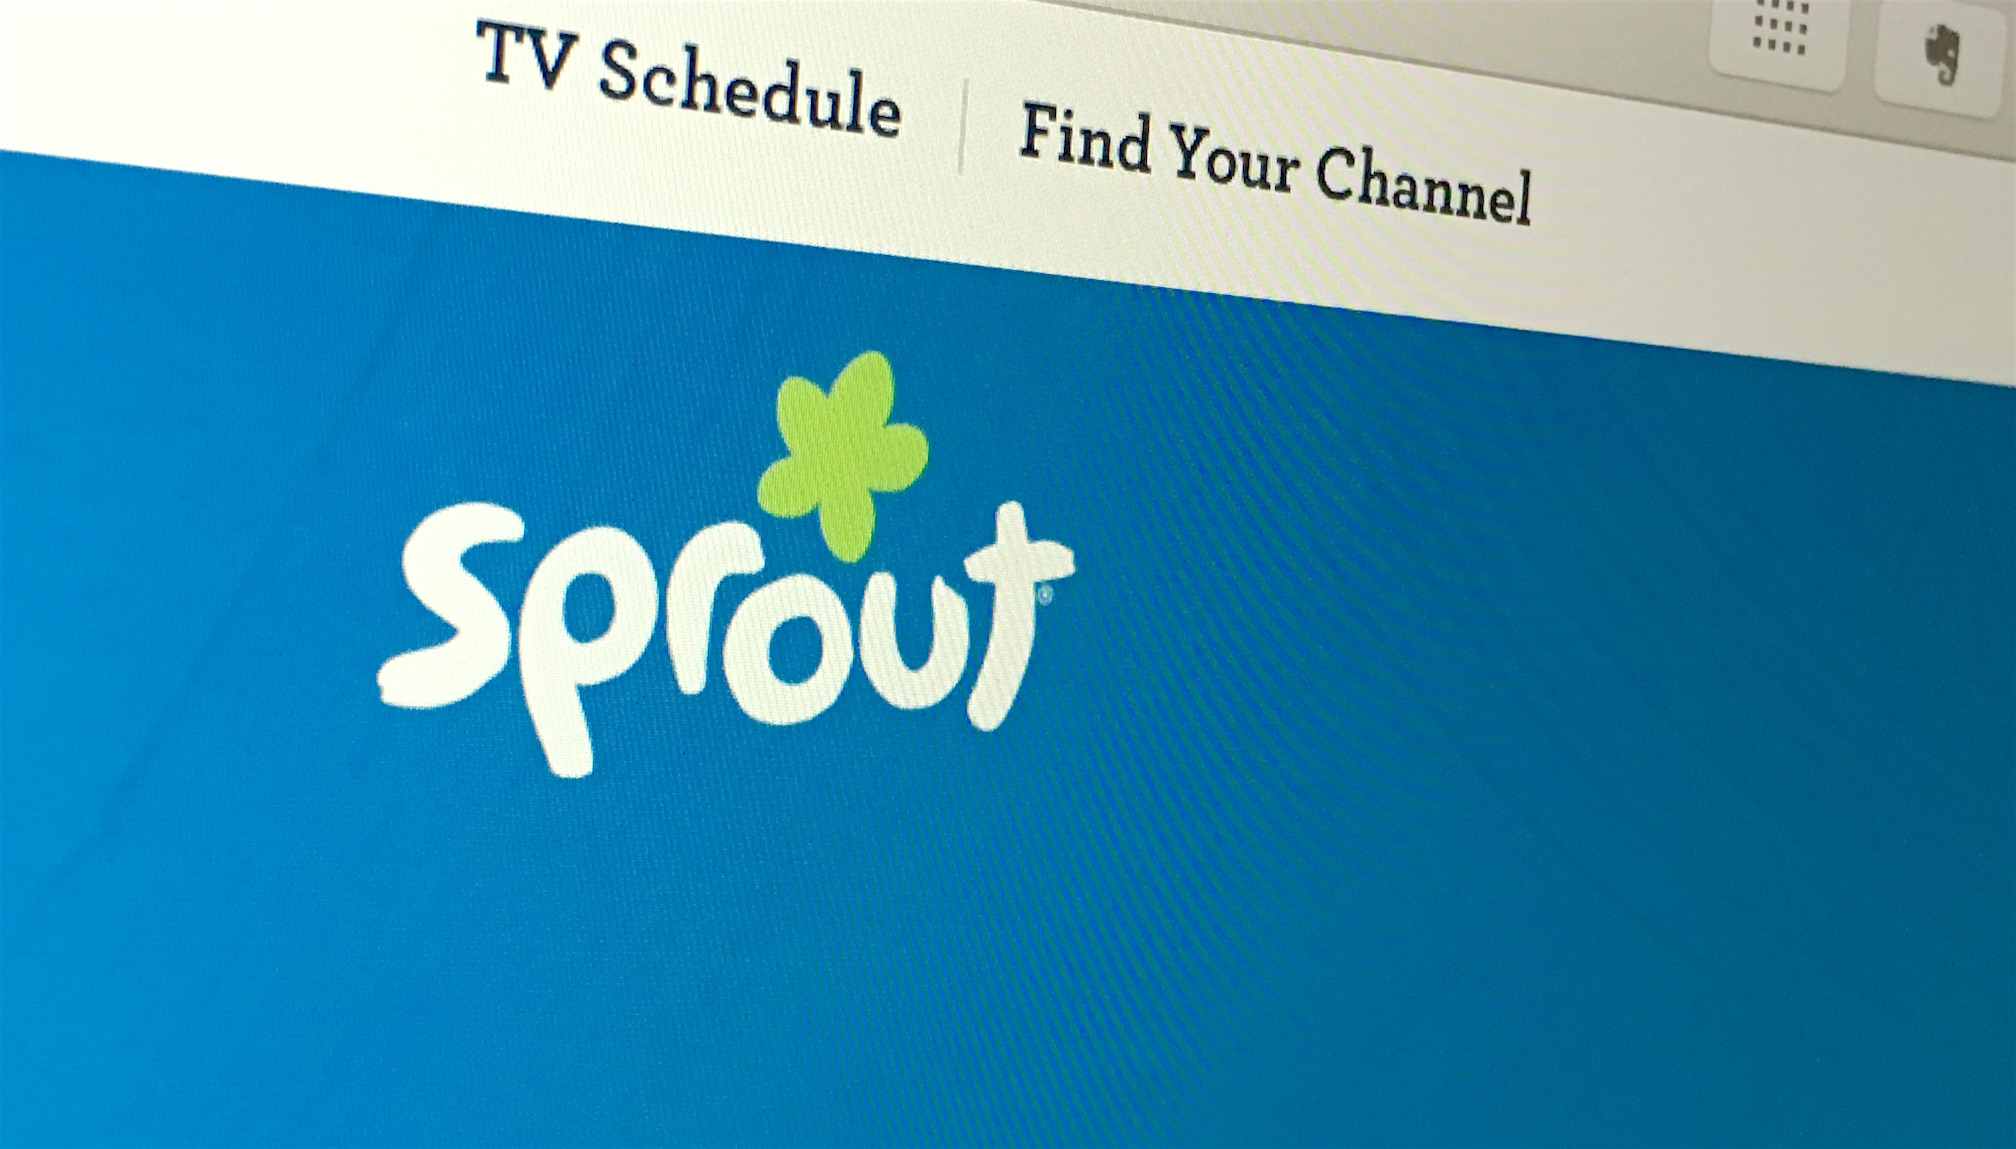 sproutonline.com is like the apple.com of kids show websites